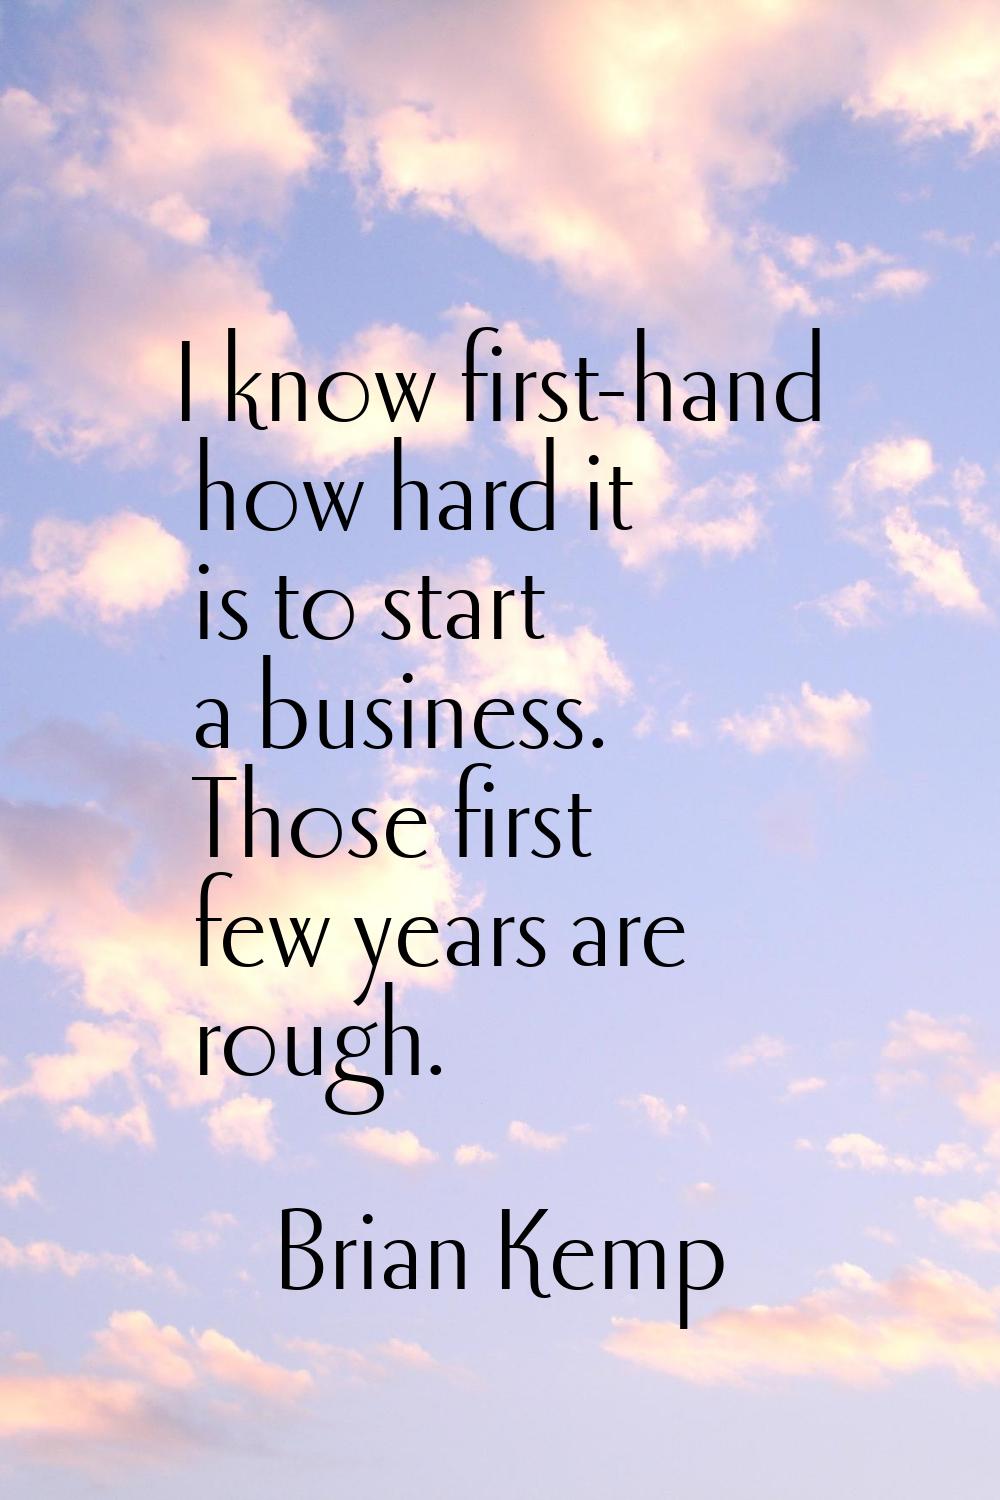 I know first-hand how hard it is to start a business. Those first few years are rough.